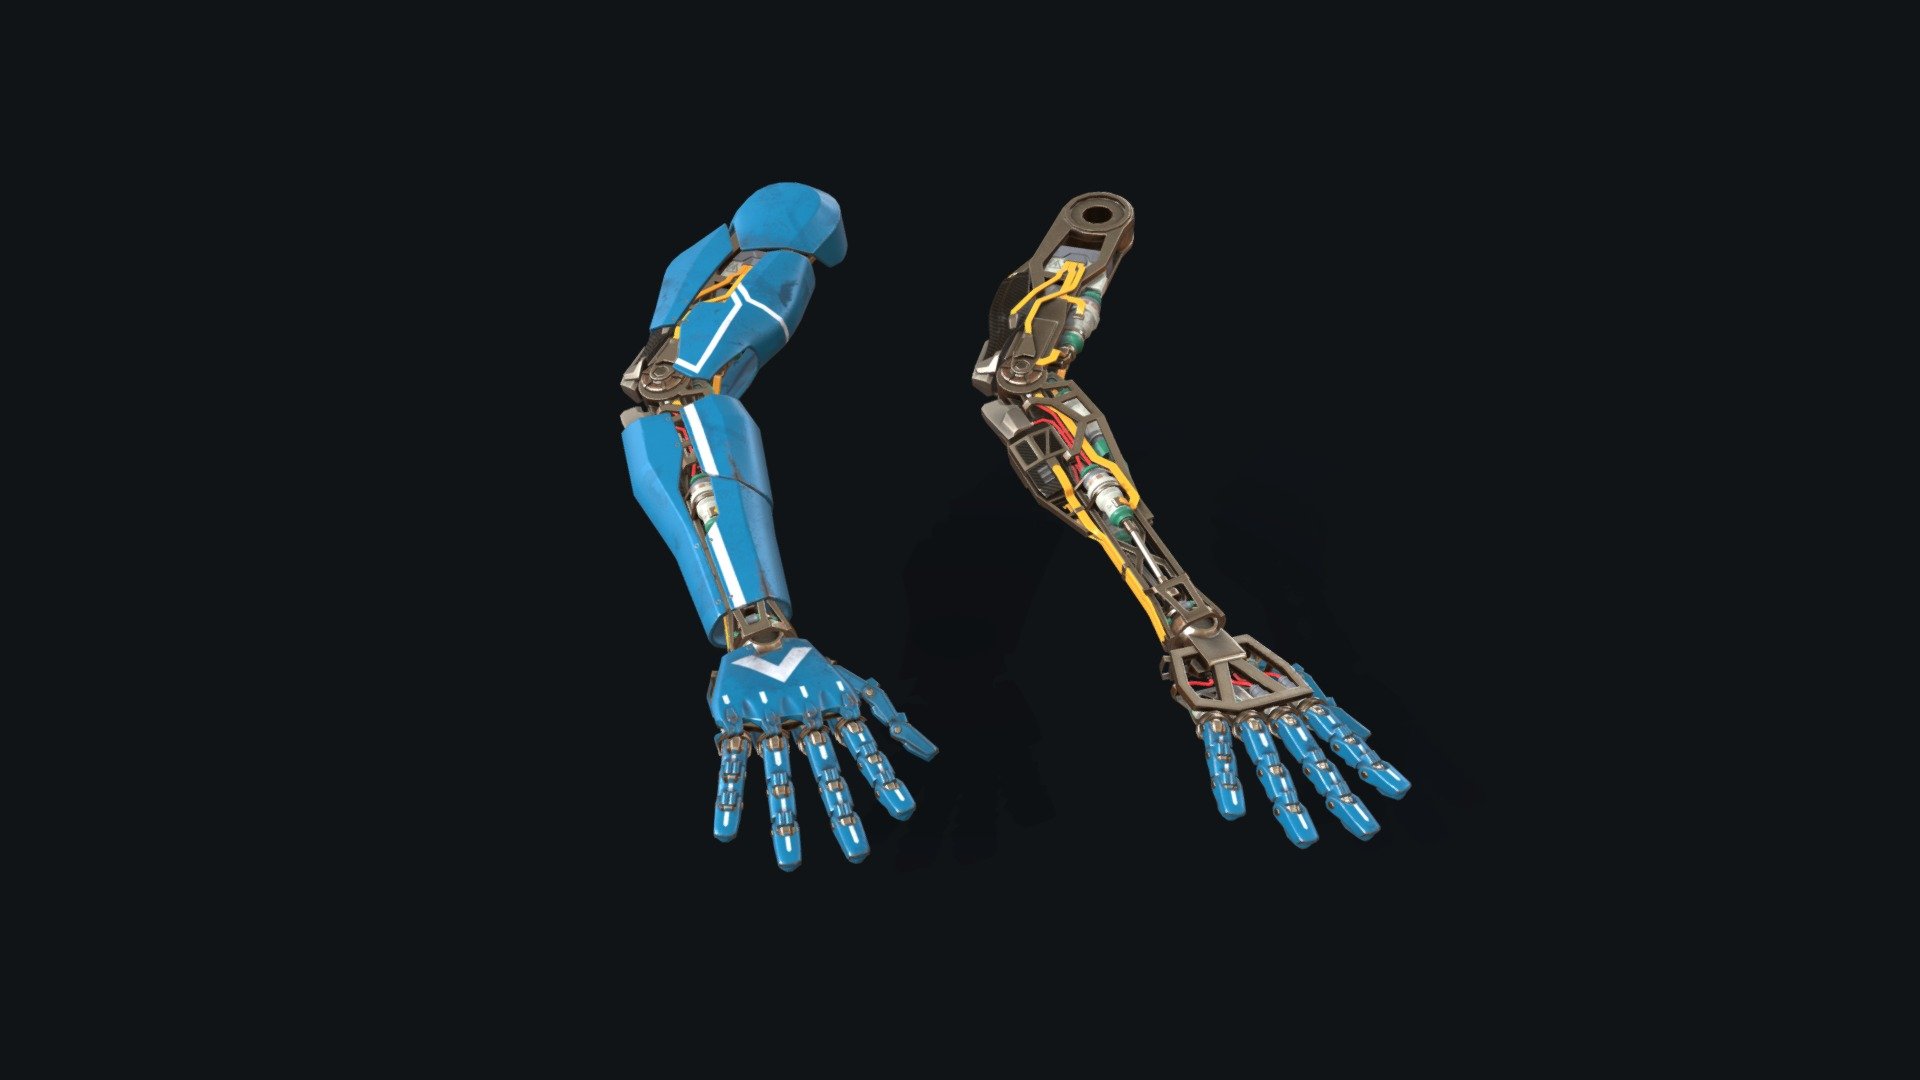 Here's a cybernetic arm I did for upcoming update of House Flipper :&gt; Enjoy! - Cybernetic Arm - 3D model by FancyFez 3d model